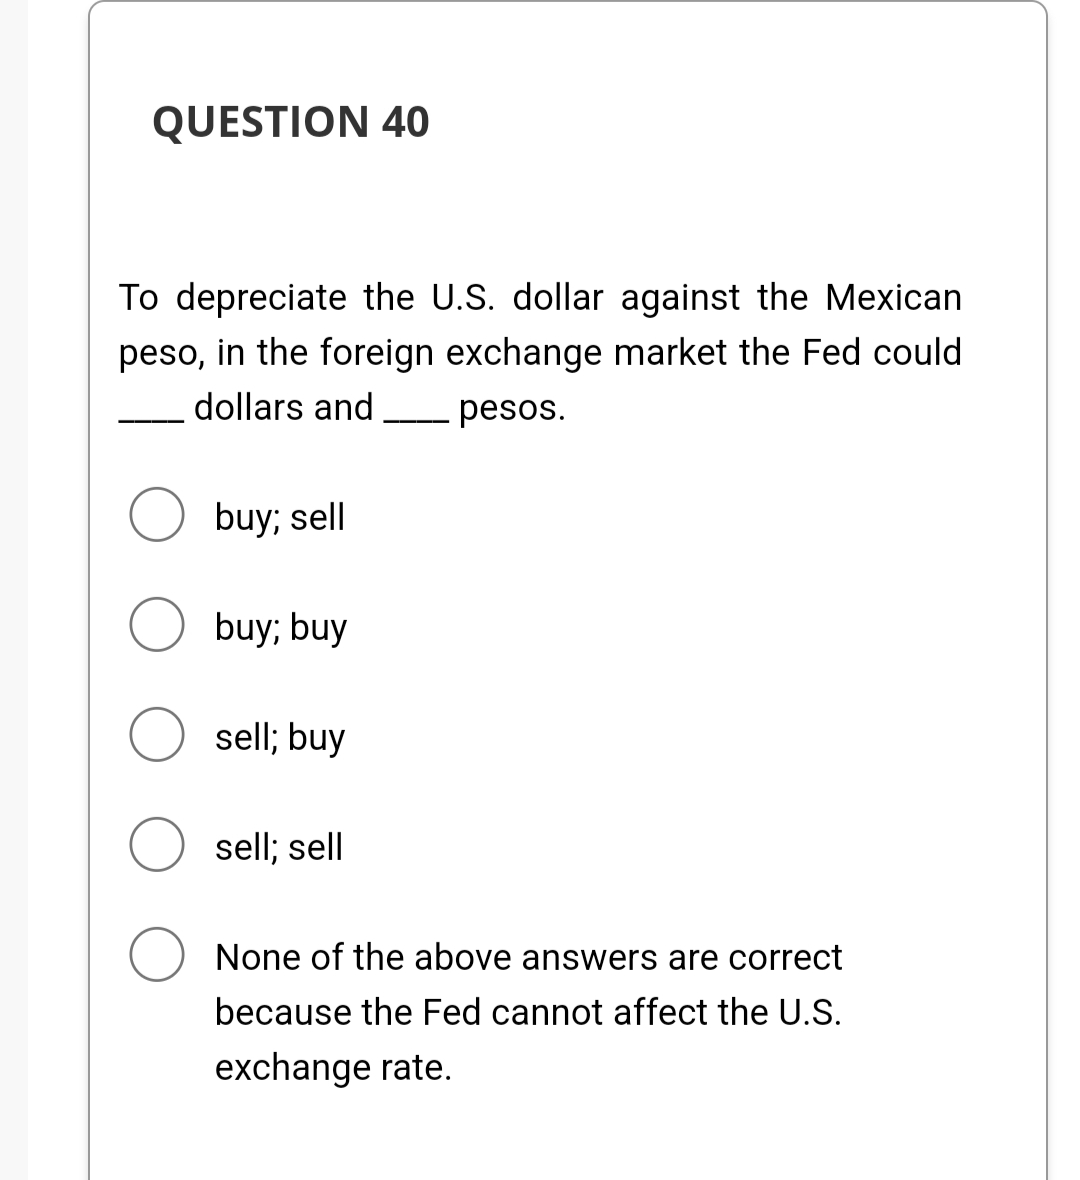 QUESTION 40
To depreciate the U.S. dollar against the Mexican
peso, in the foreign exchange market the Fed could
dollars and
- pesos.
buy; sell
O buy; buy
sell; buy
sell; sell
None of the above answers are correct
because the Fed cannot affect the U.S.
exchange rate.